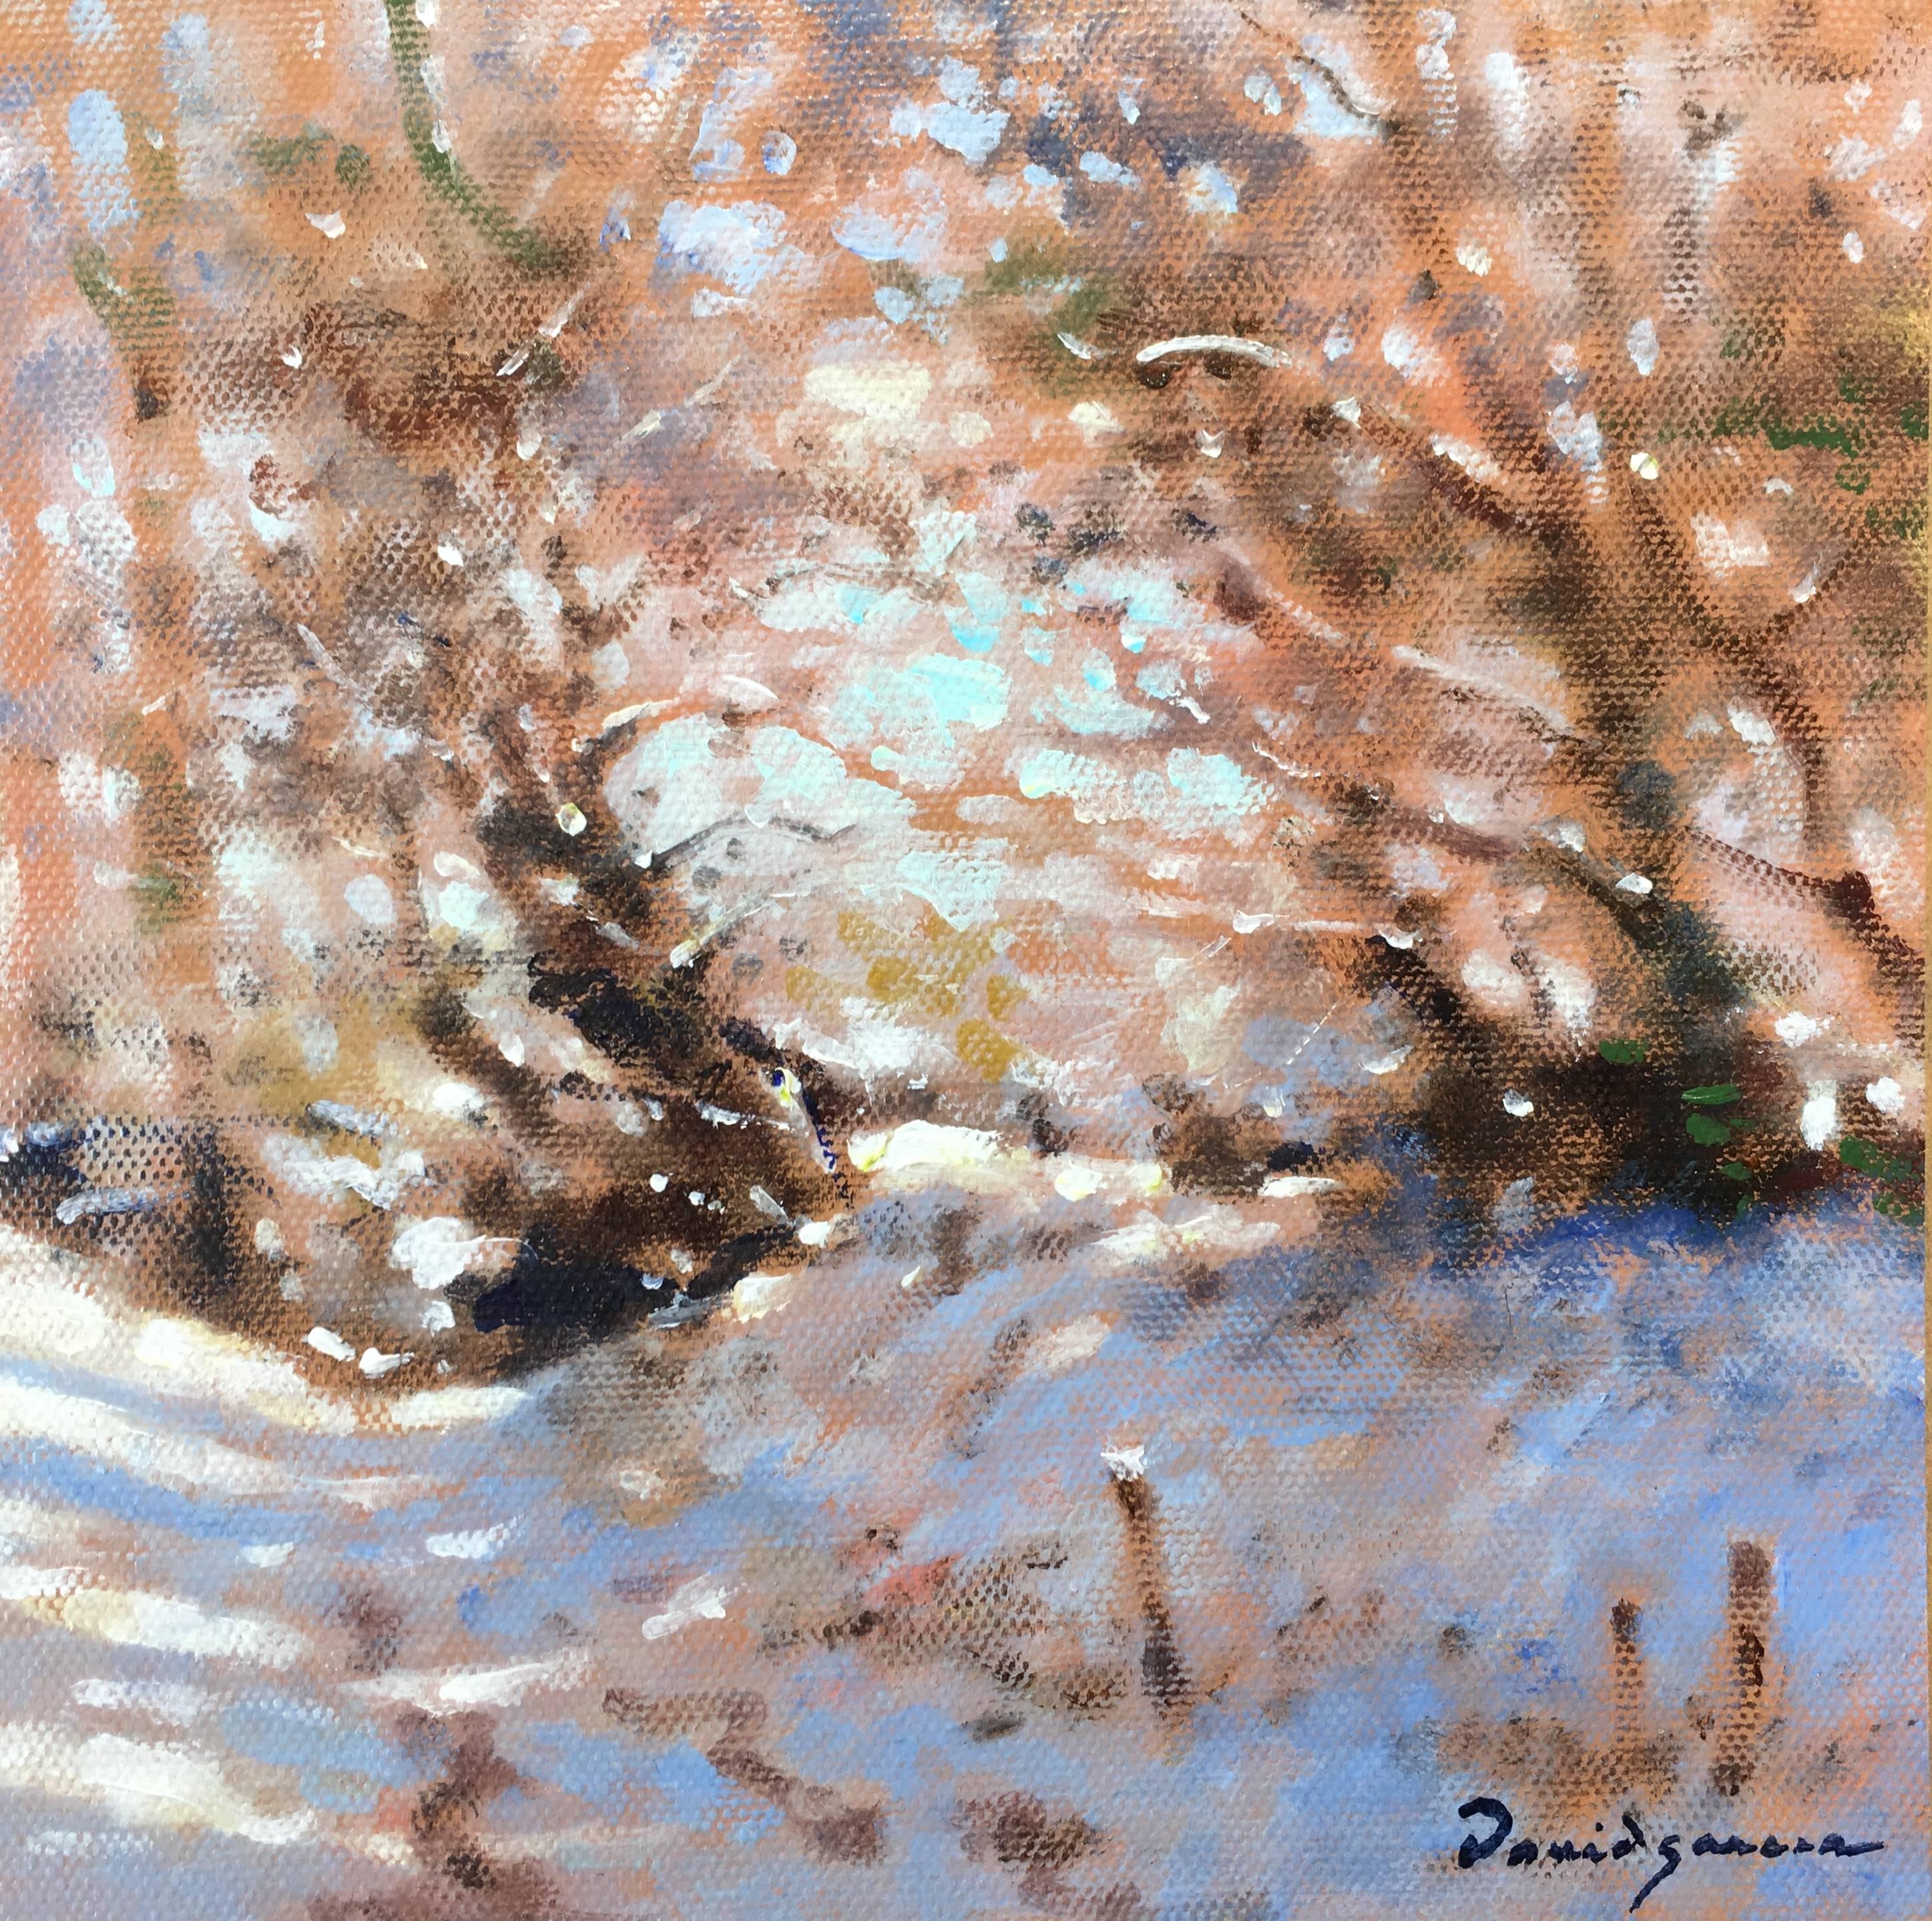 David Garcia Figurative Painting - Undergrowth in winter, little oil on canvas, impressionist style